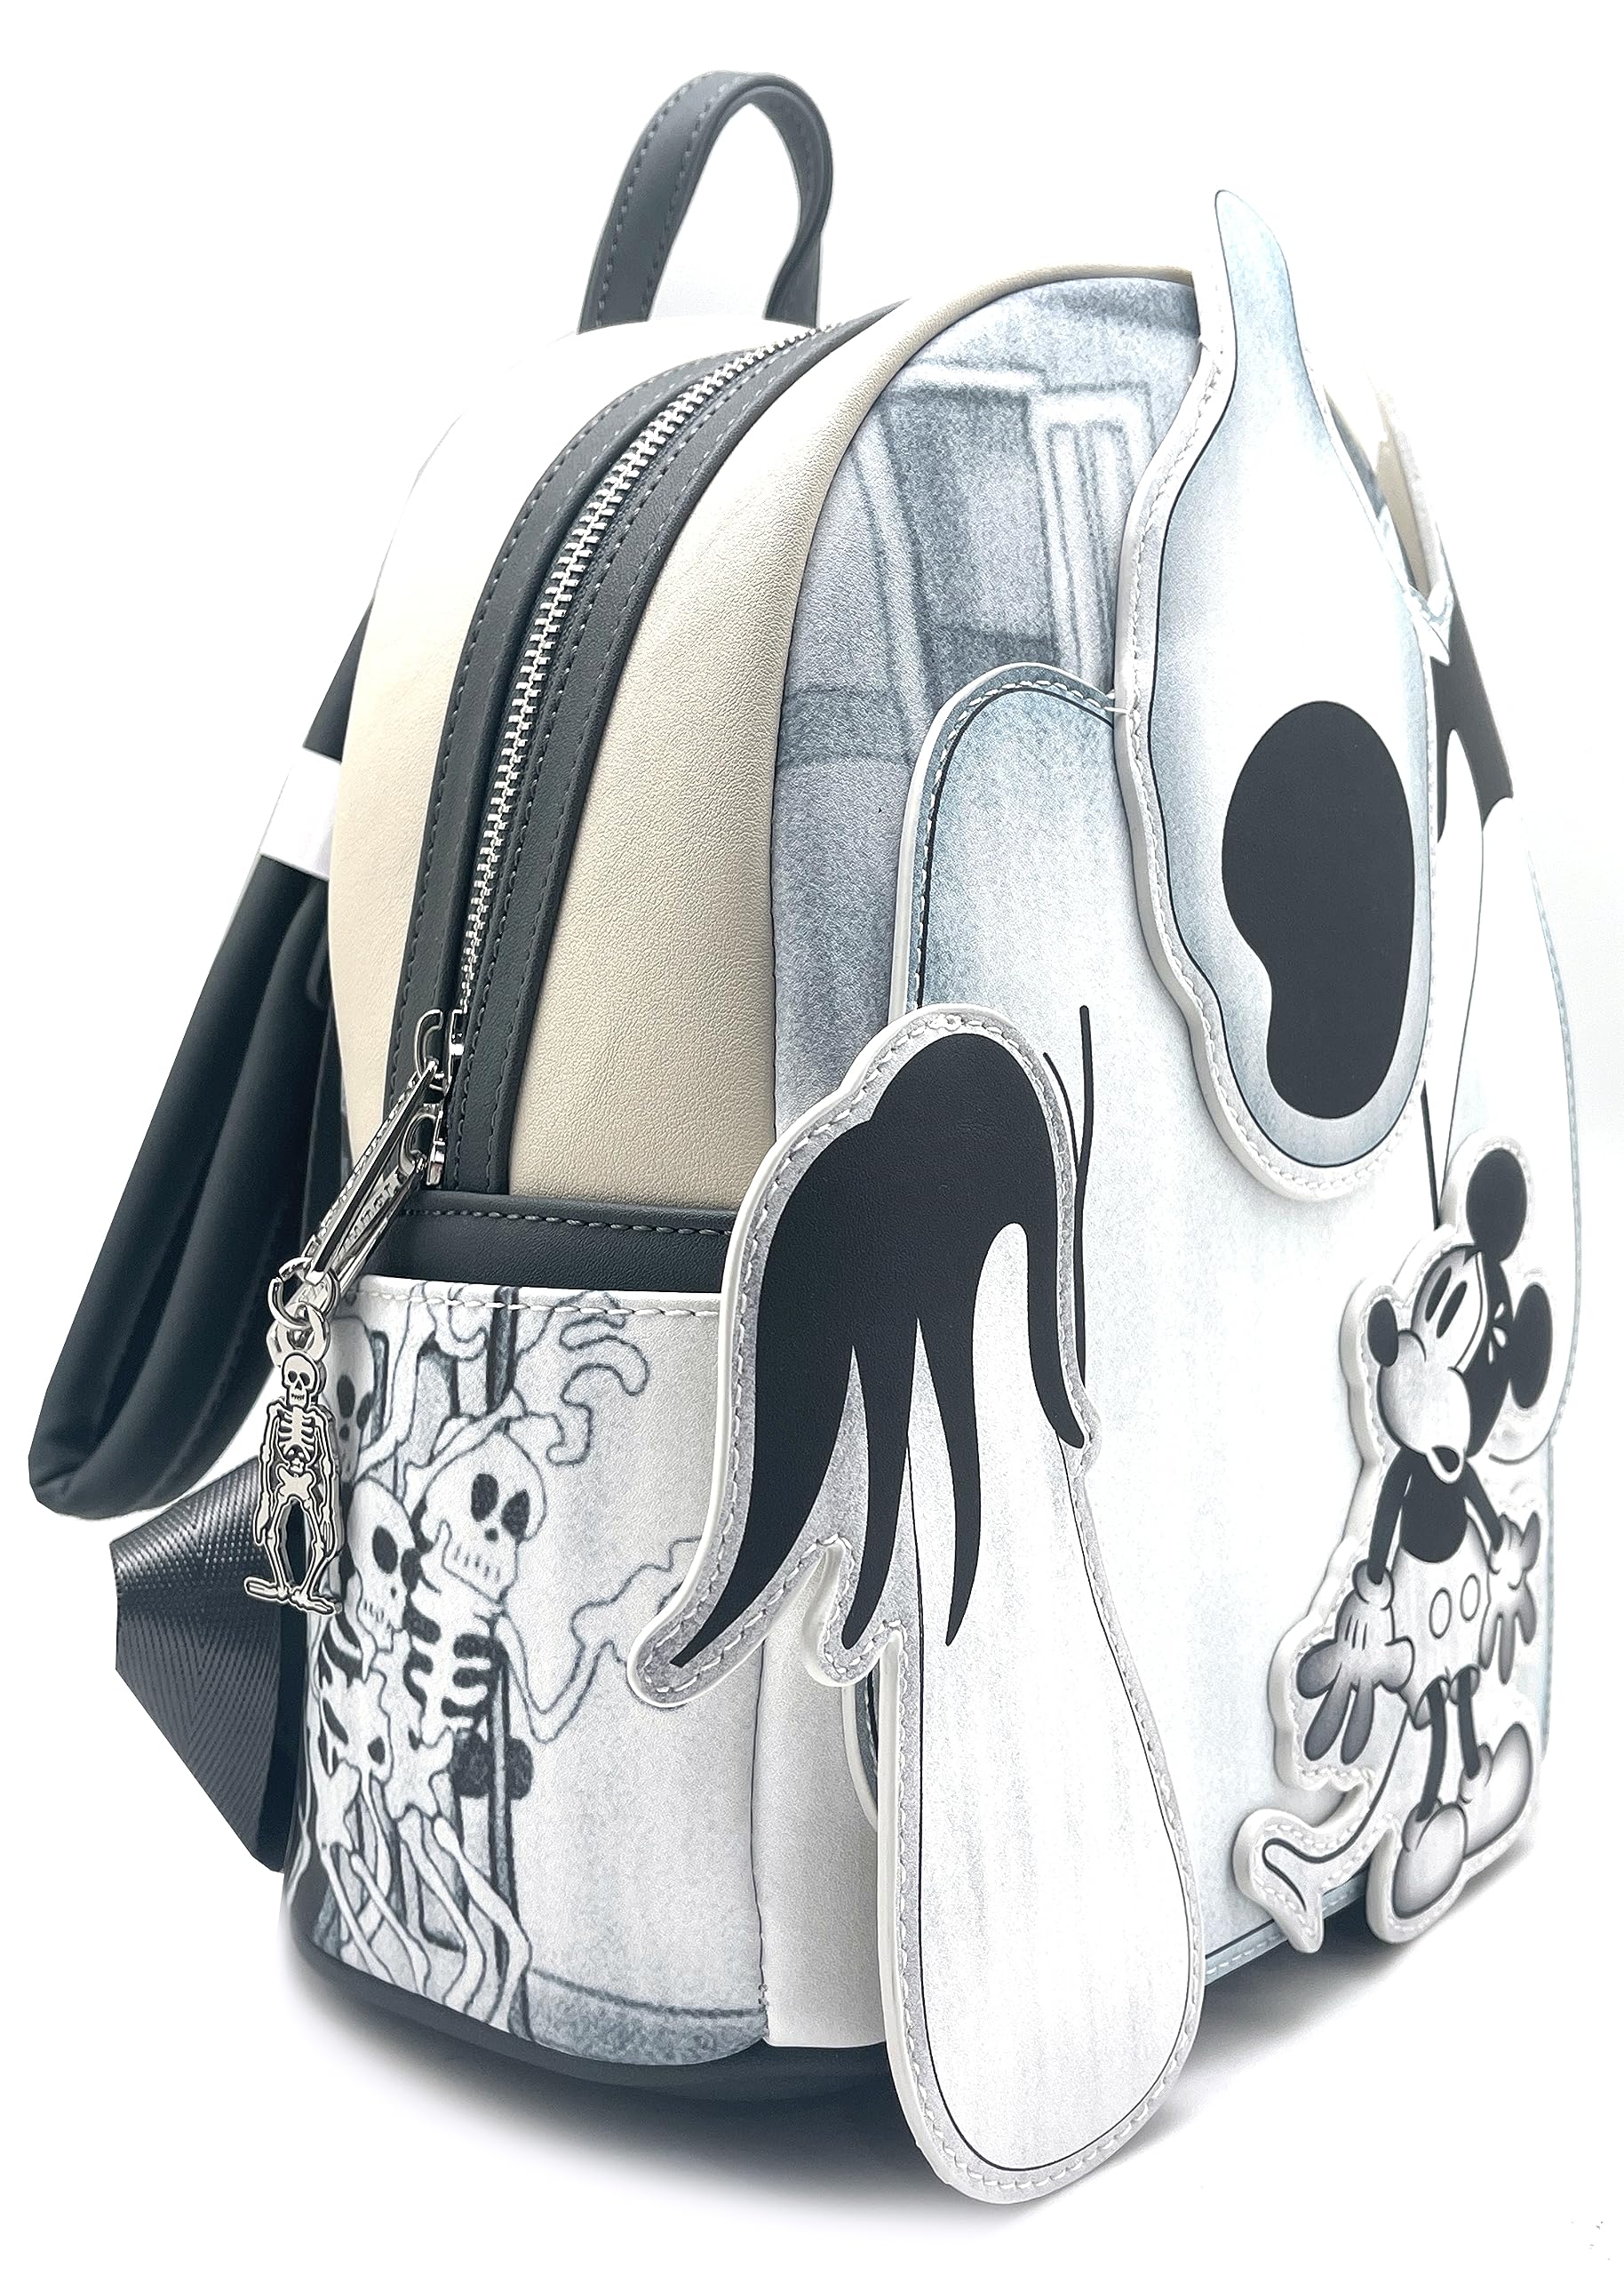 Loungefly X LASR Exclusive Disney The Haunted House Mickey Mini Backpack Fashion Cosplay Disneybound Cute Backpack